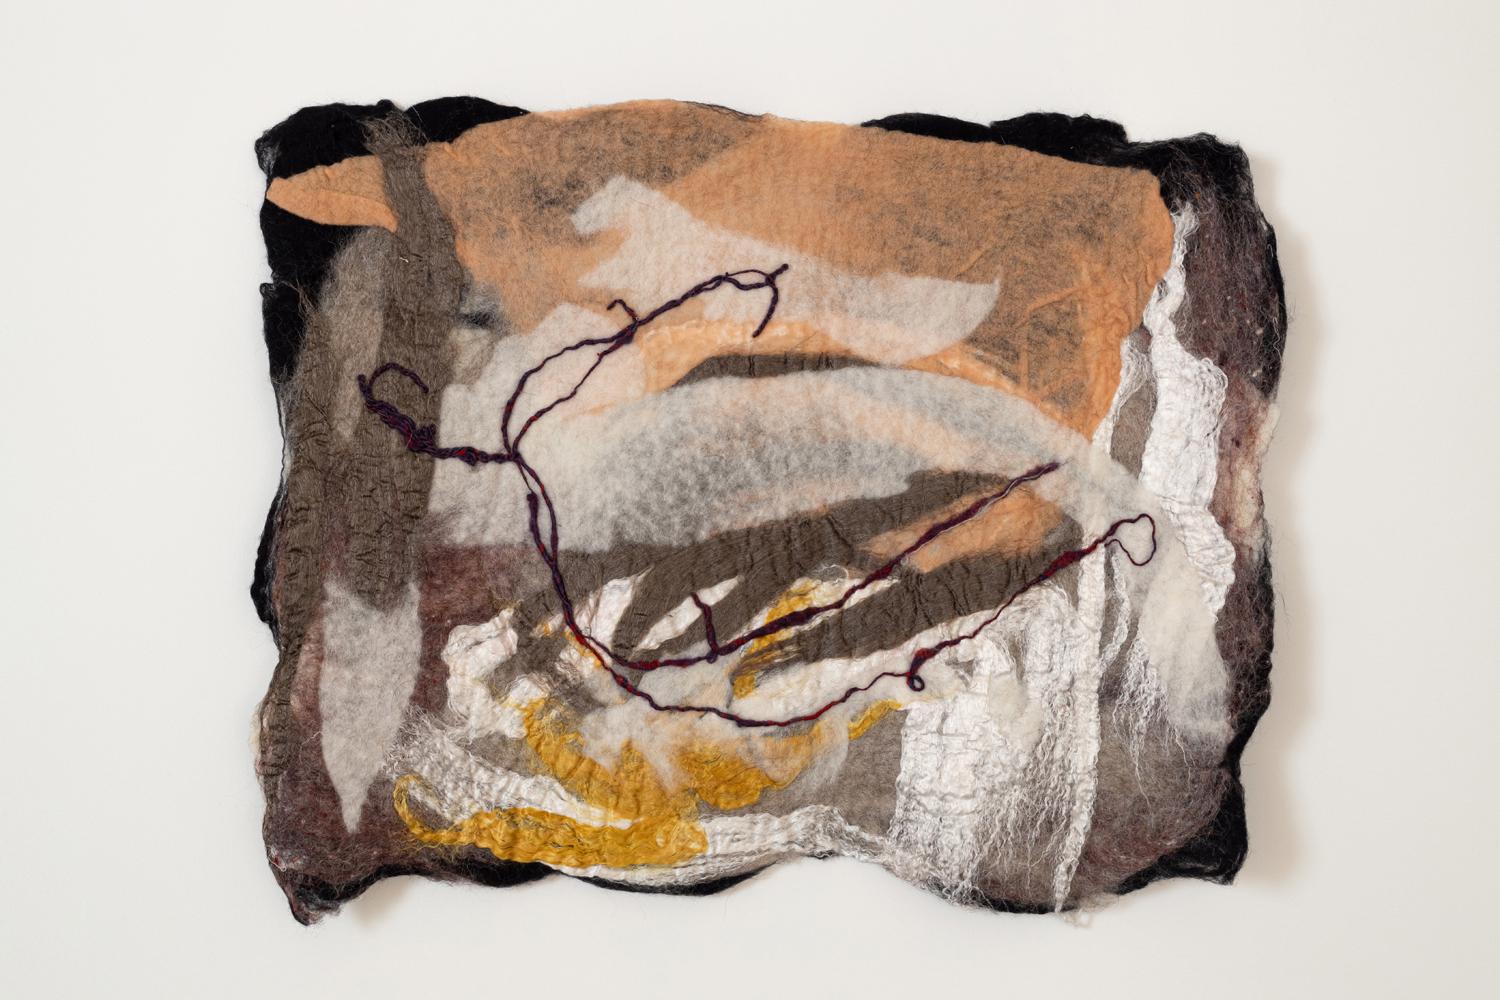 Guernica de la Ecologia, Estudio en Color 3 Tapestry by Claudy Jongstra
One of a kind.
Dimensions: W 70 x H 55 cm. 
Materials: Wool Merino, Drenth Heath, Raw Silks, Cotton Gauze.

Claudy Jongstra is known worldwide for her monumental artworks